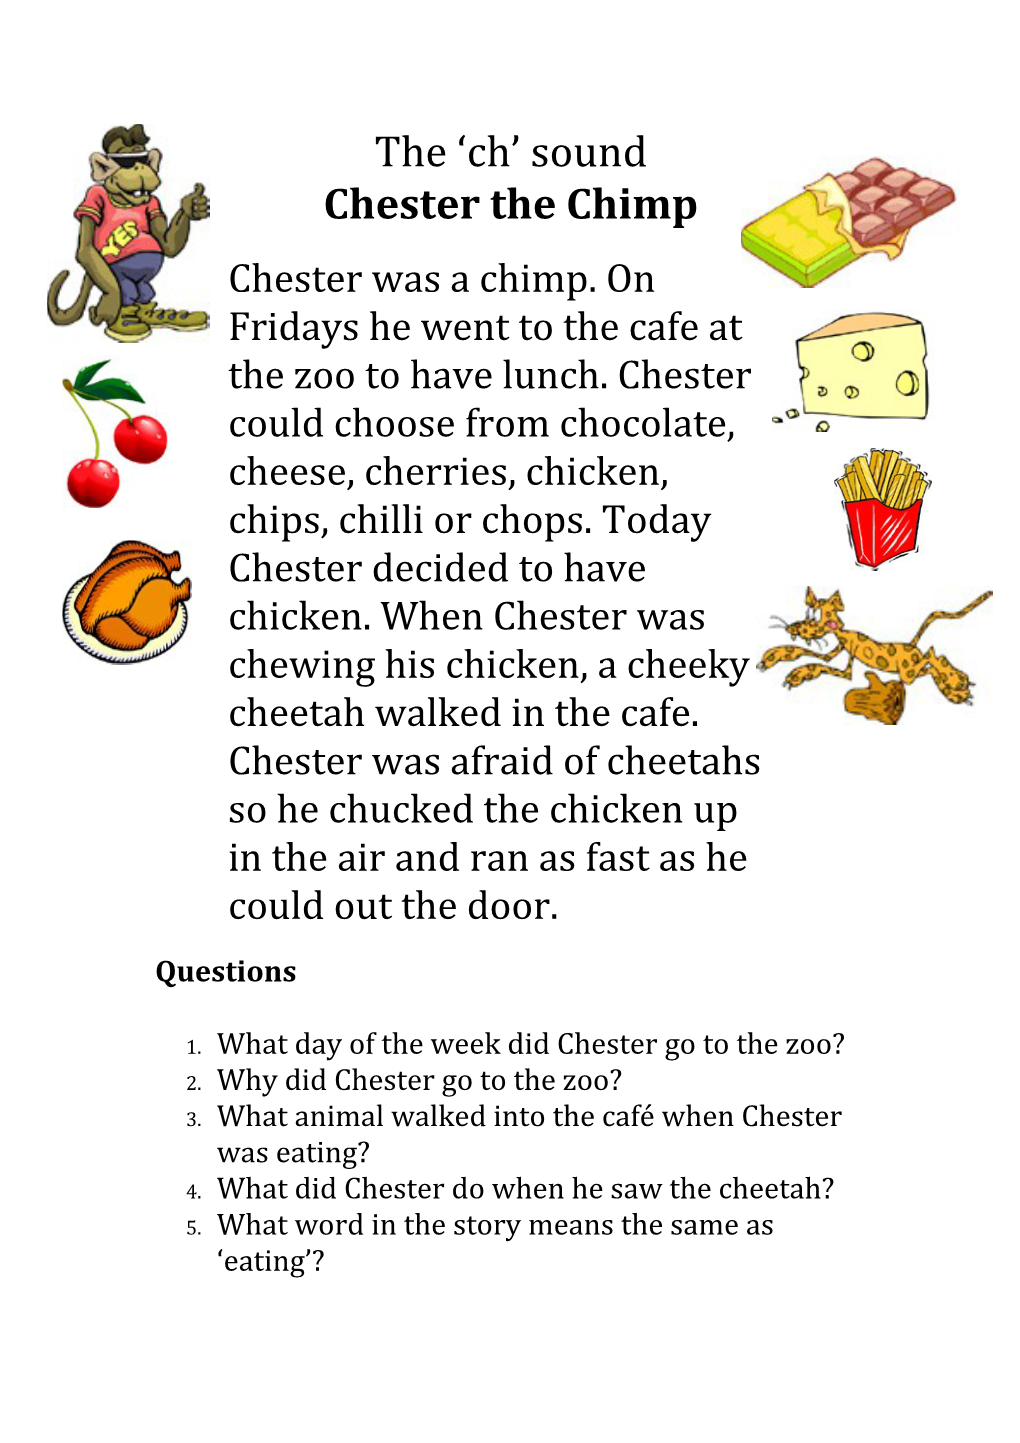 1. What Day of the Week Did Chester Go to the Zoo?